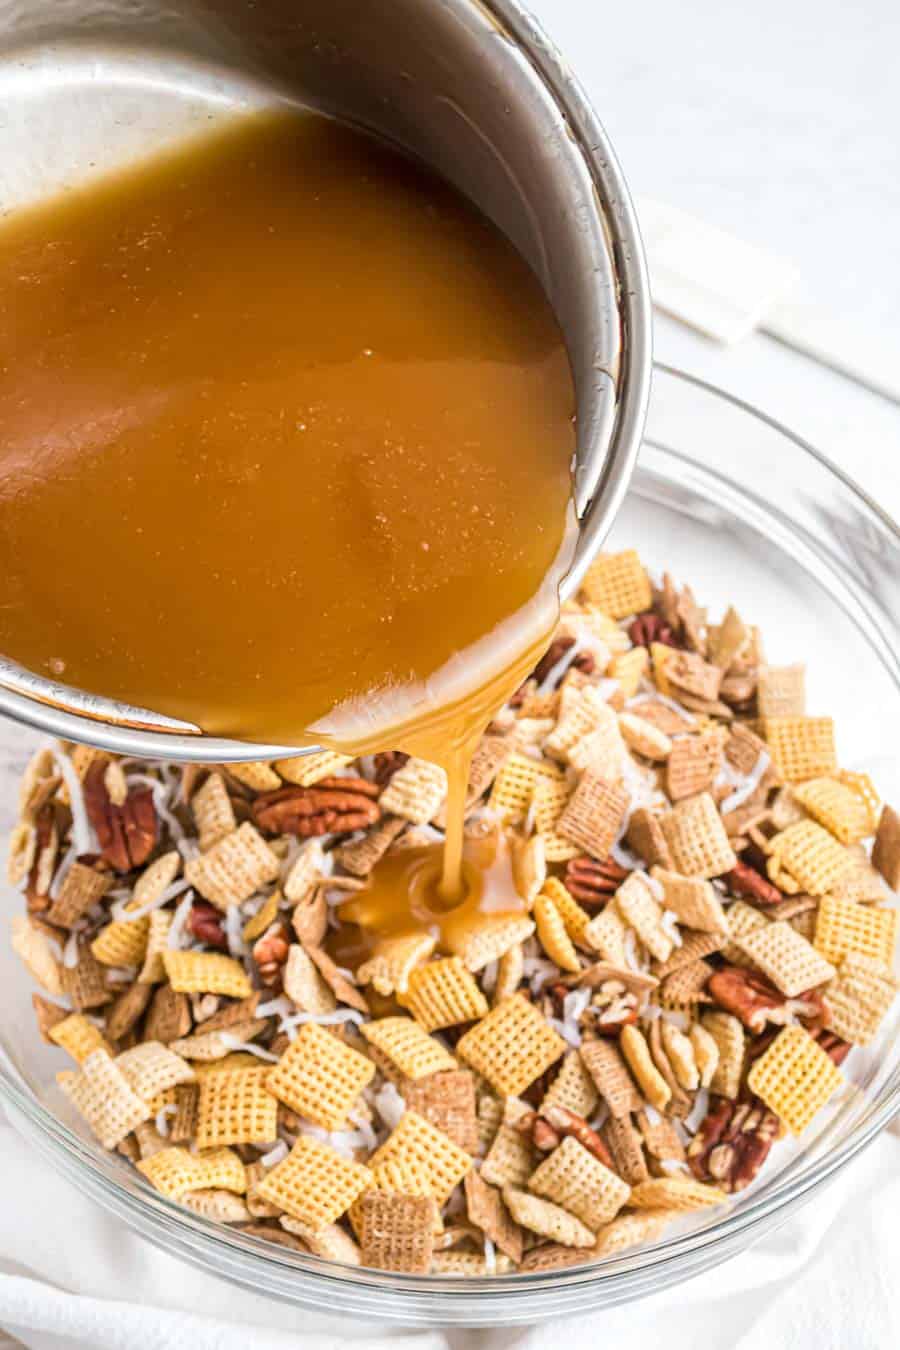 carmel sauce being poured from a pan into a clear glass bowl of chex-mix.